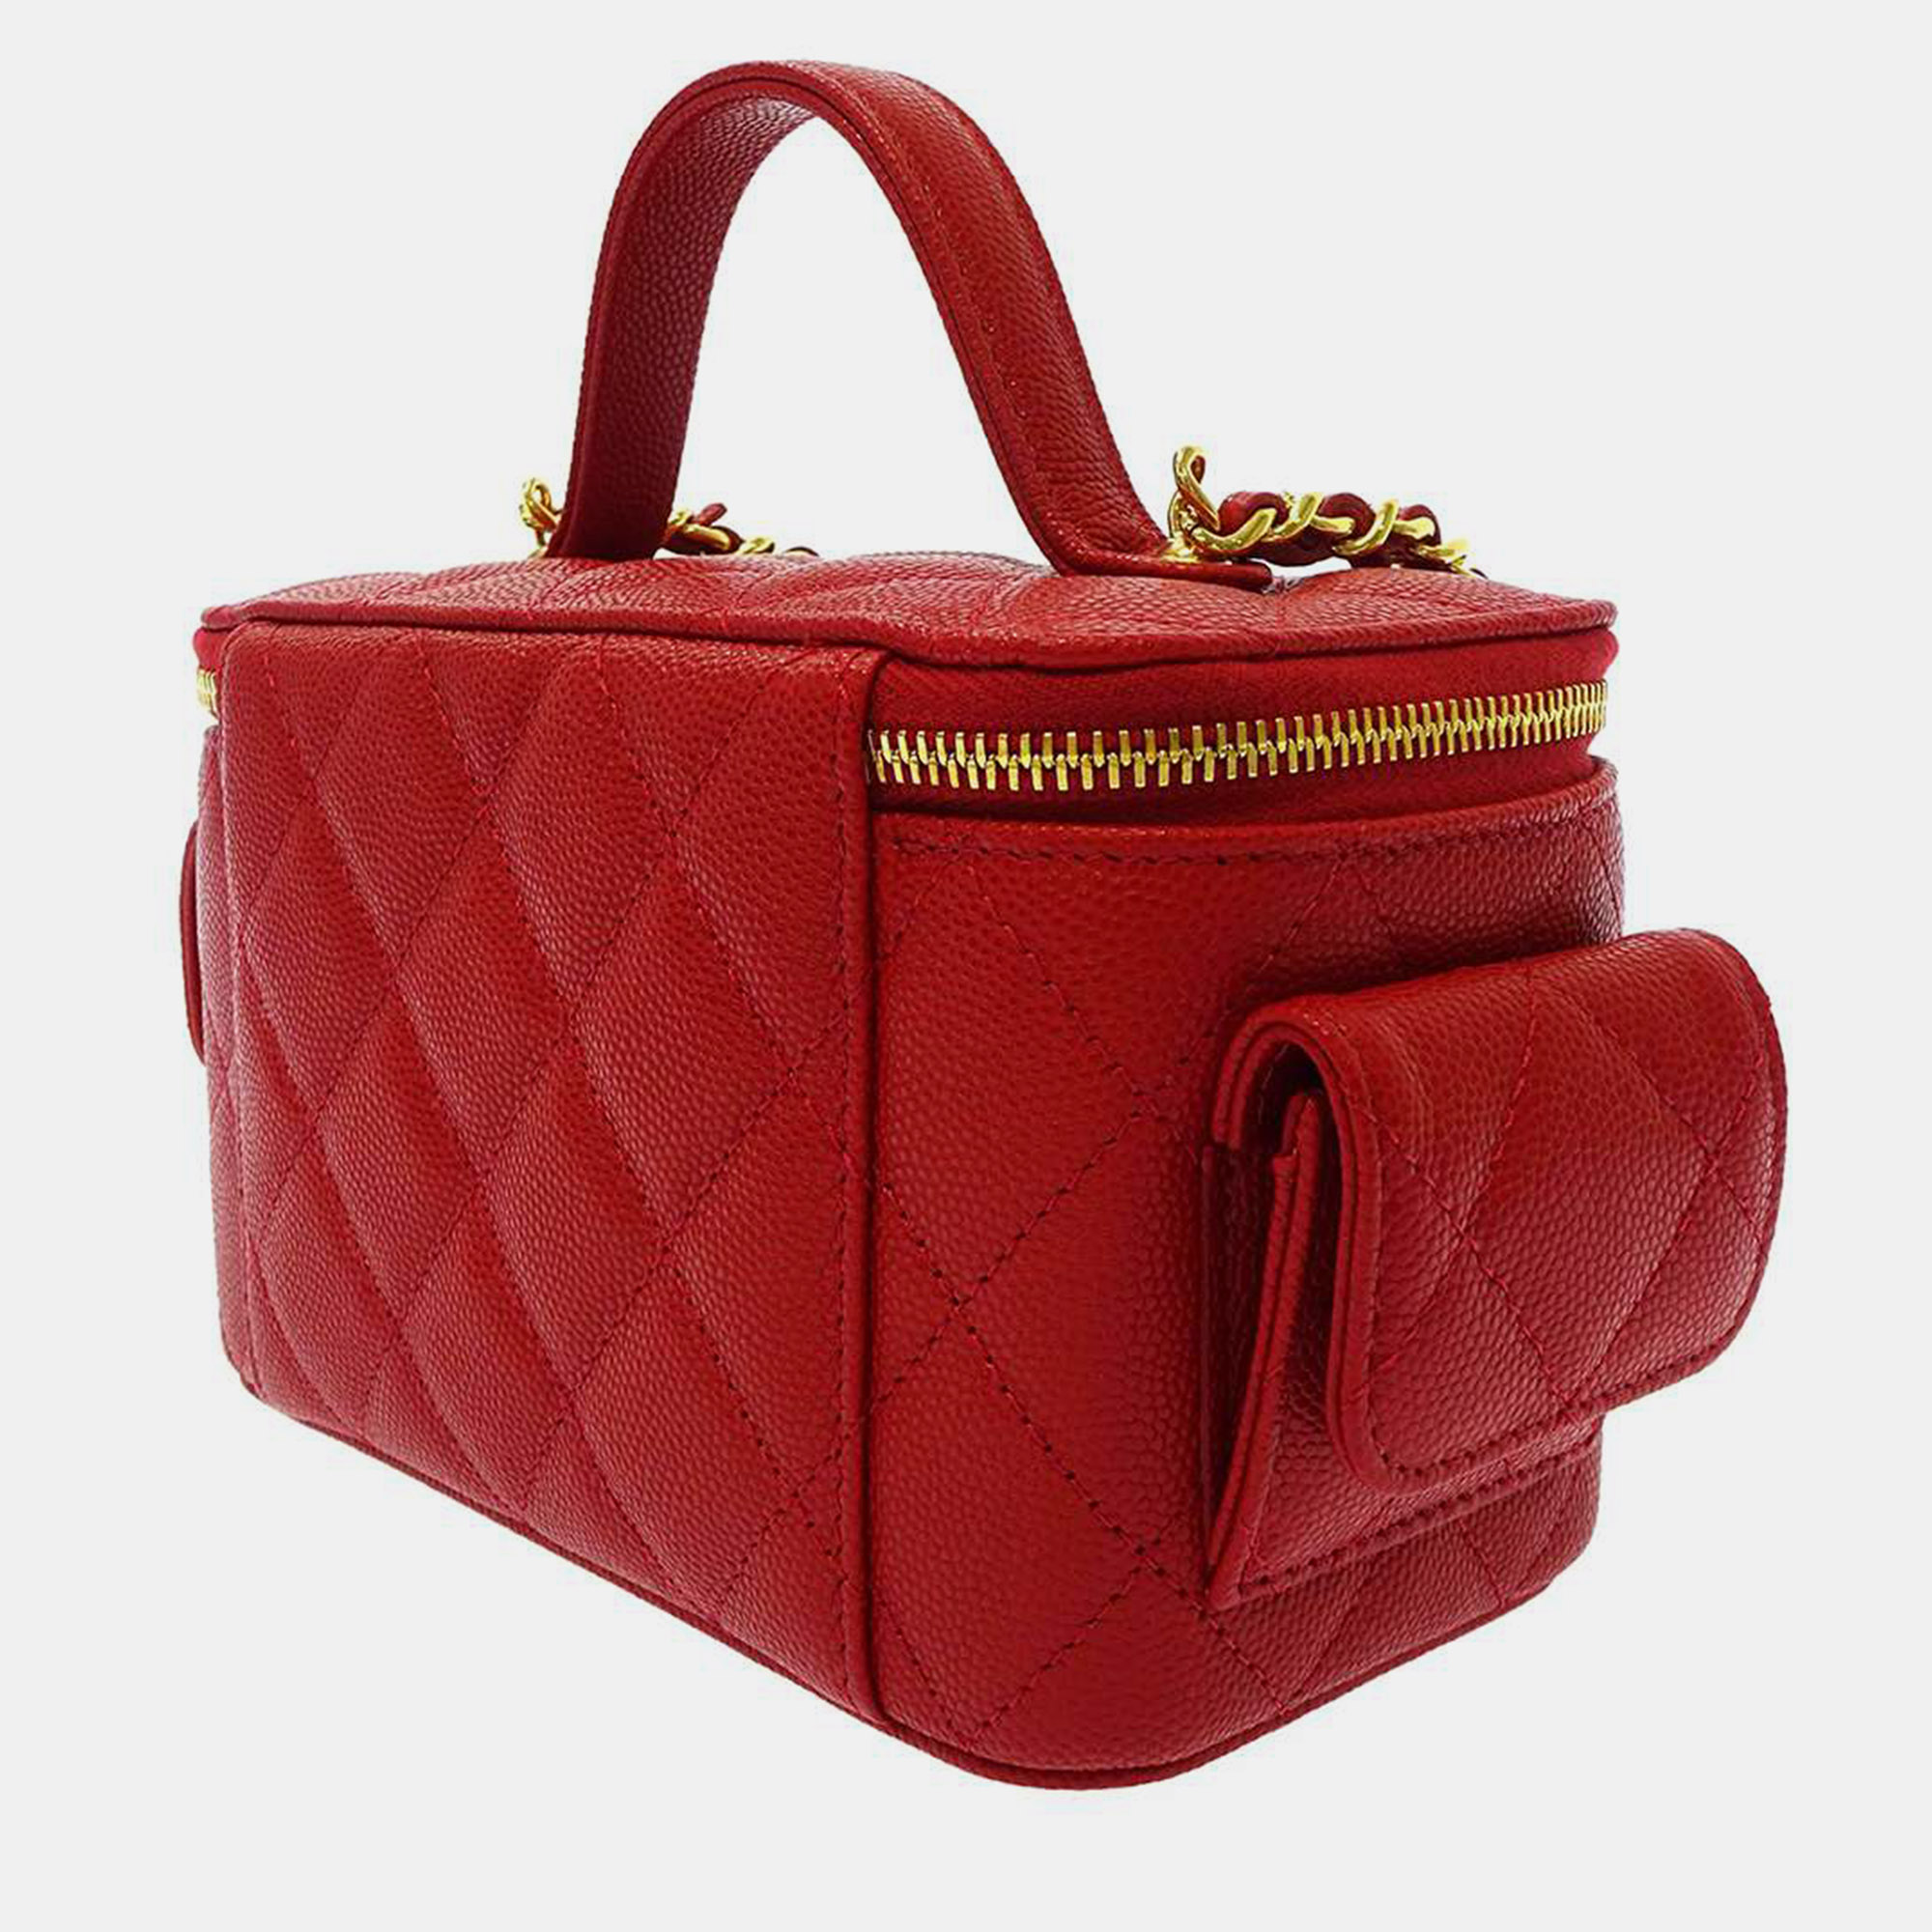 Chanel Red Leather Vanity Case